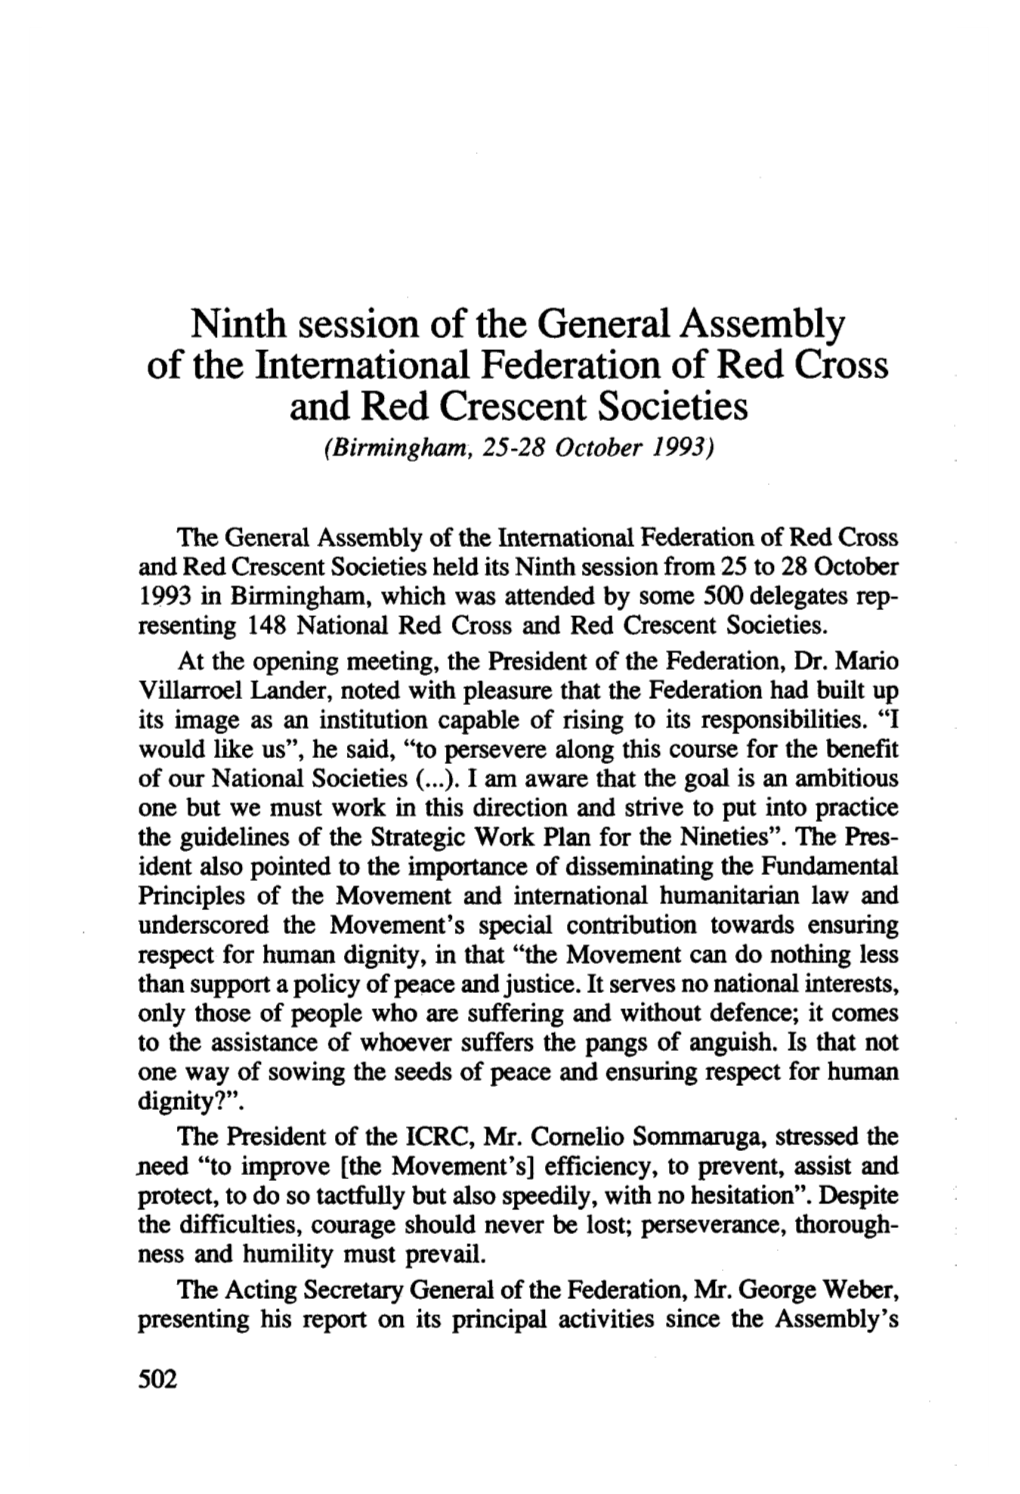 Ninth Session of the General Assembly of the International Federation of Red Cross and Red Crescent Societies (Birmingham, 25-28 October 1993)